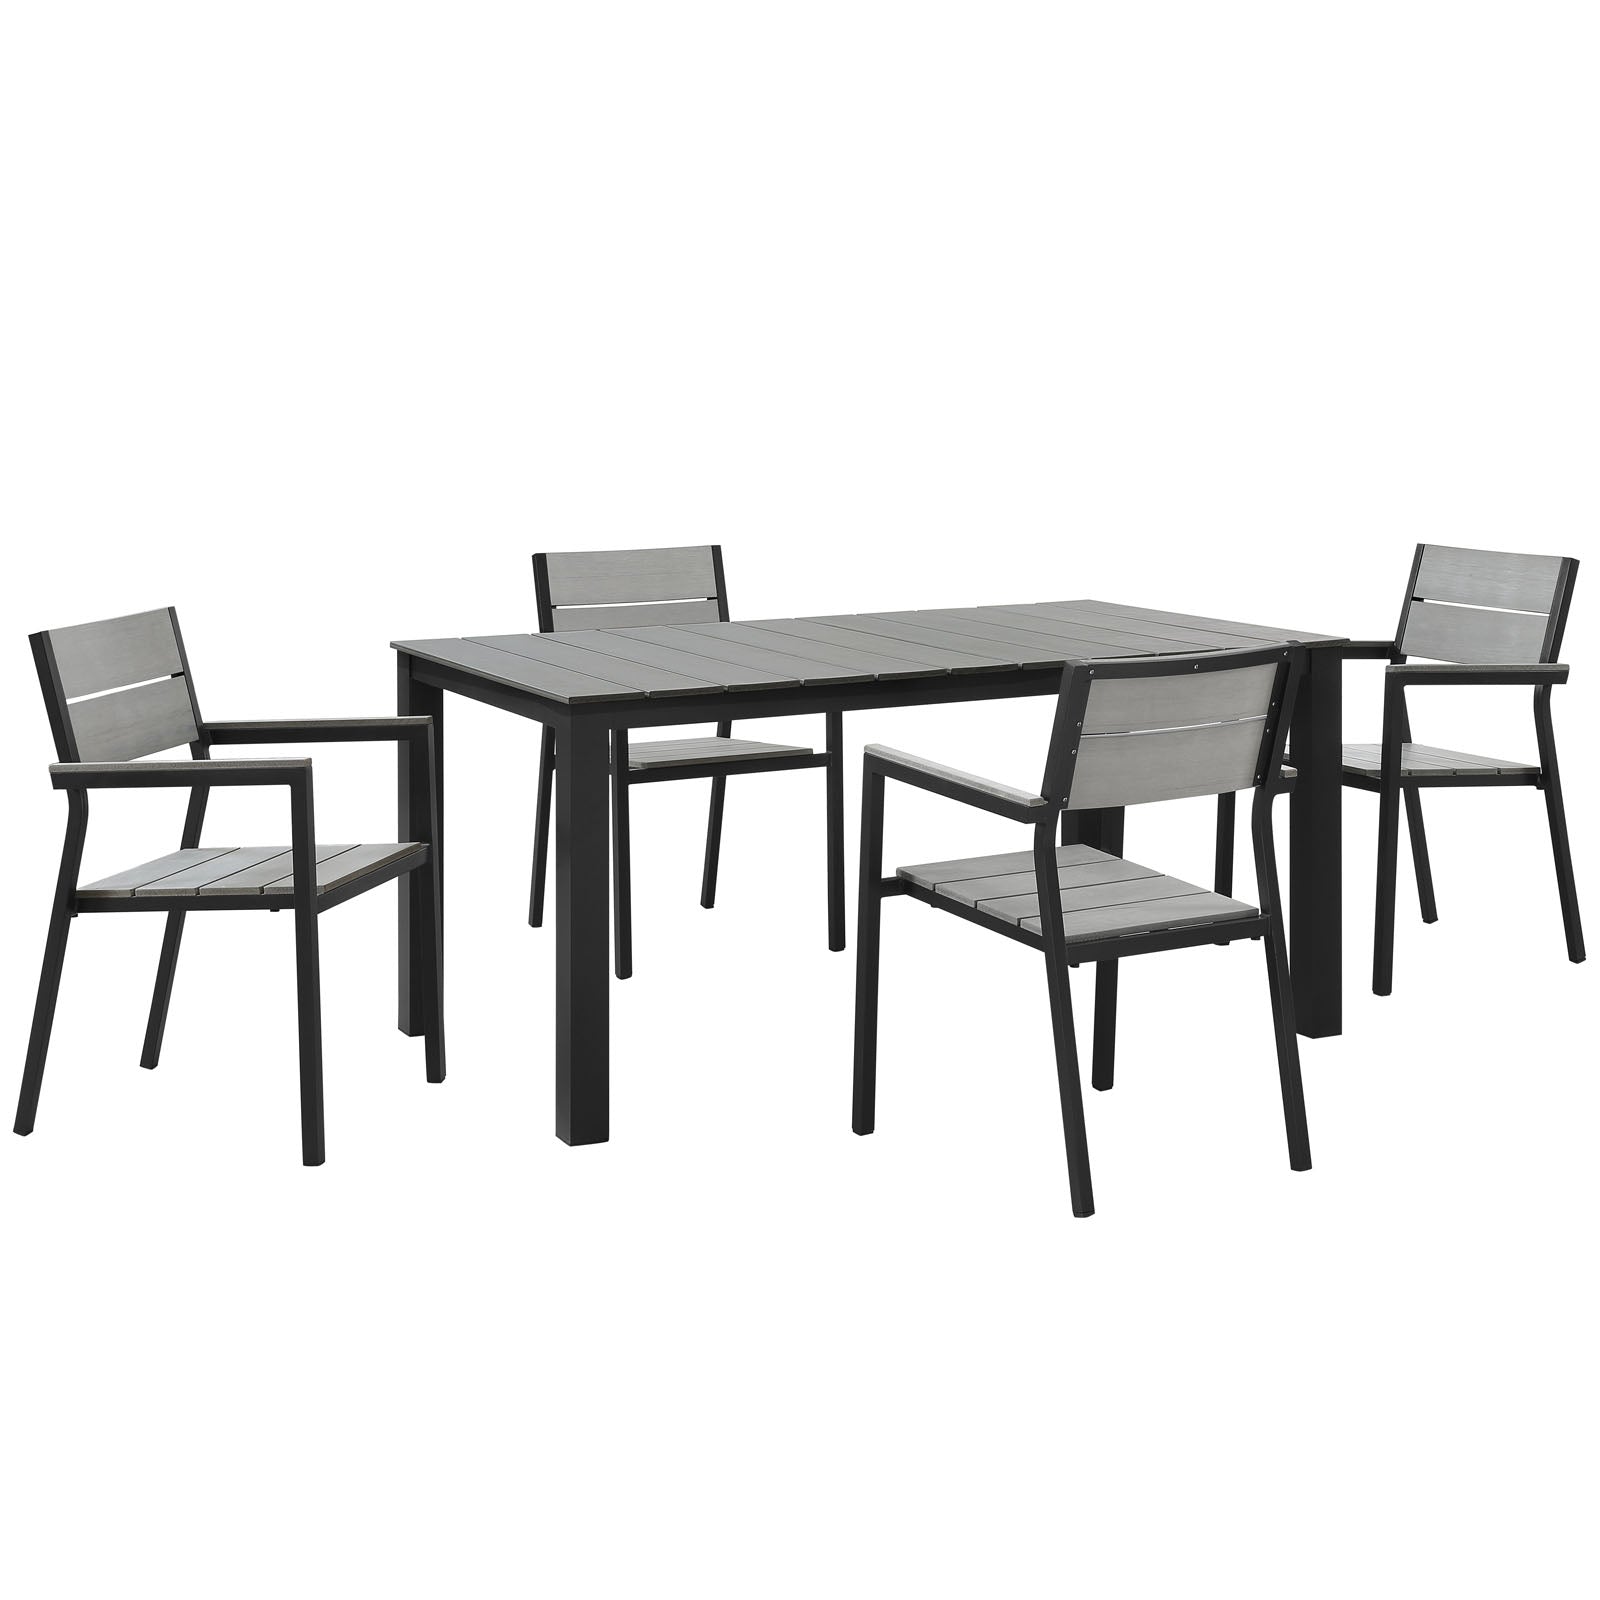 Modway Outdoor Dining Sets - Maine 5 Piece Outdoor Patio Dining Set Brown & Gray